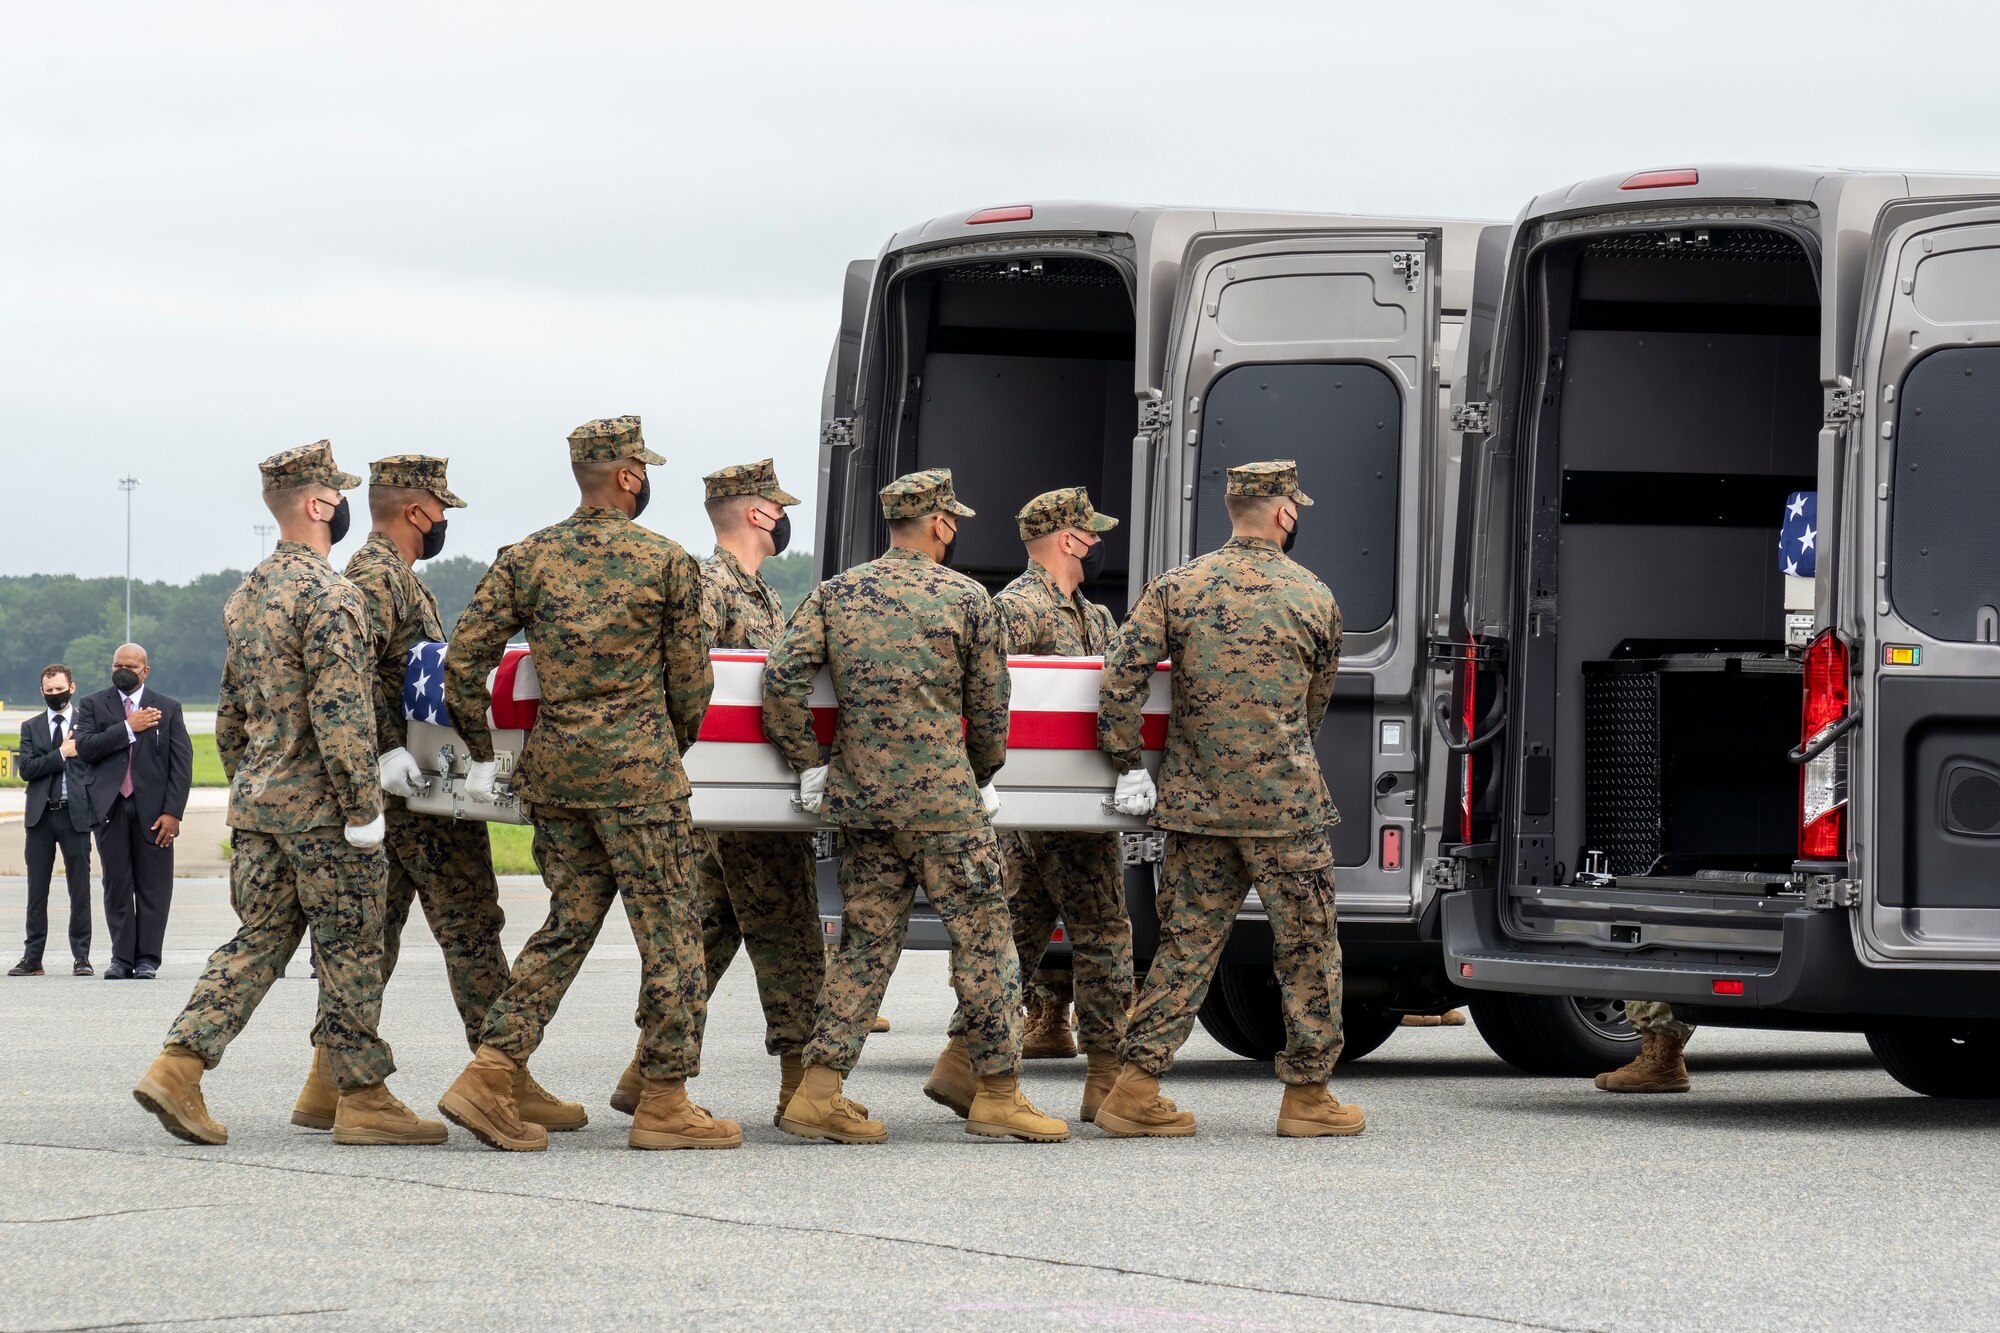 A U.S. Marine Corps carry team transfers the remains of Marine Corps Lance Cpl. Dylan R. Merola of Rancho Cucamonga, California, Aug. 29, 2021 at Dover Air Force Base, Delaware. Merola was assigned to 2nd Battalion, 1st Marine Regiment, 1st Marine Division, I Marine Expeditionary Force, Camp Pendleton, California. (U.S. Air Force photo by Jason Minto)